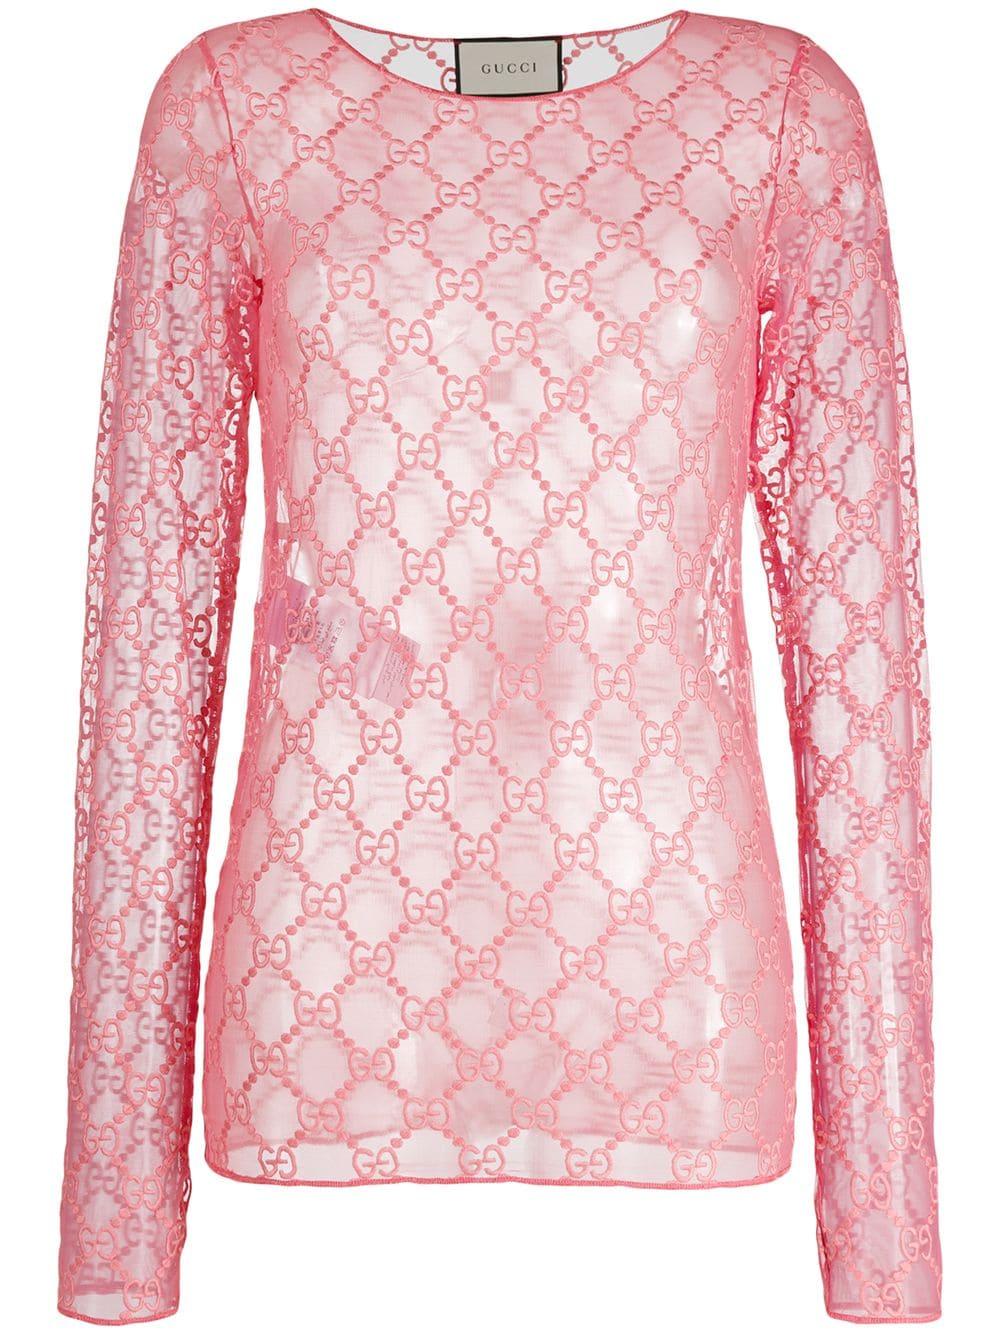 Gucci Mesh GG Pattern Blouse in Pink | Lyst